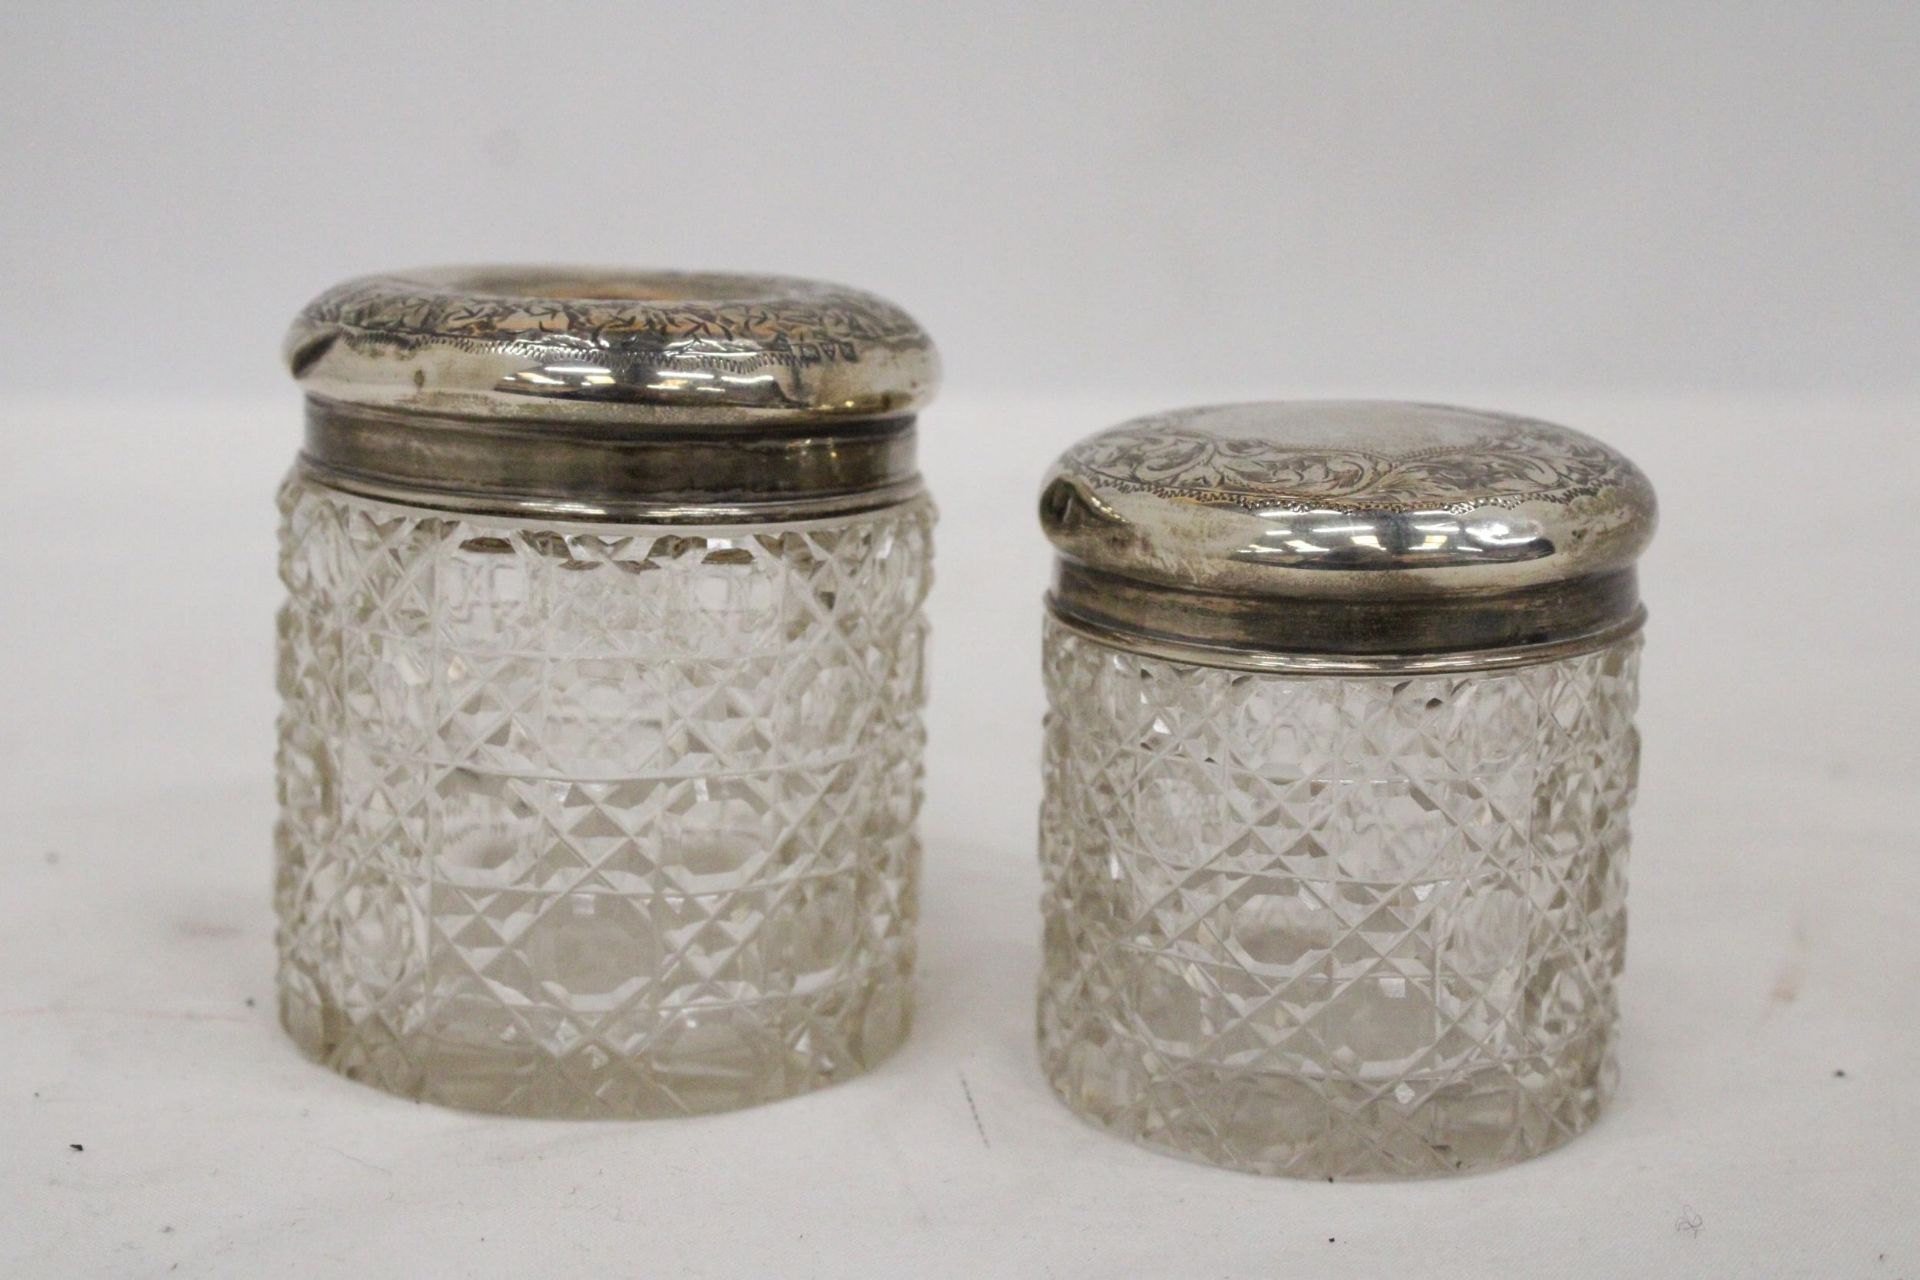 A STERLING SILVER TOP HAIR PIN JAR TOGETHER WITH A SILVER TOPPED COCKTAIL STICK HOLDER - Image 2 of 6